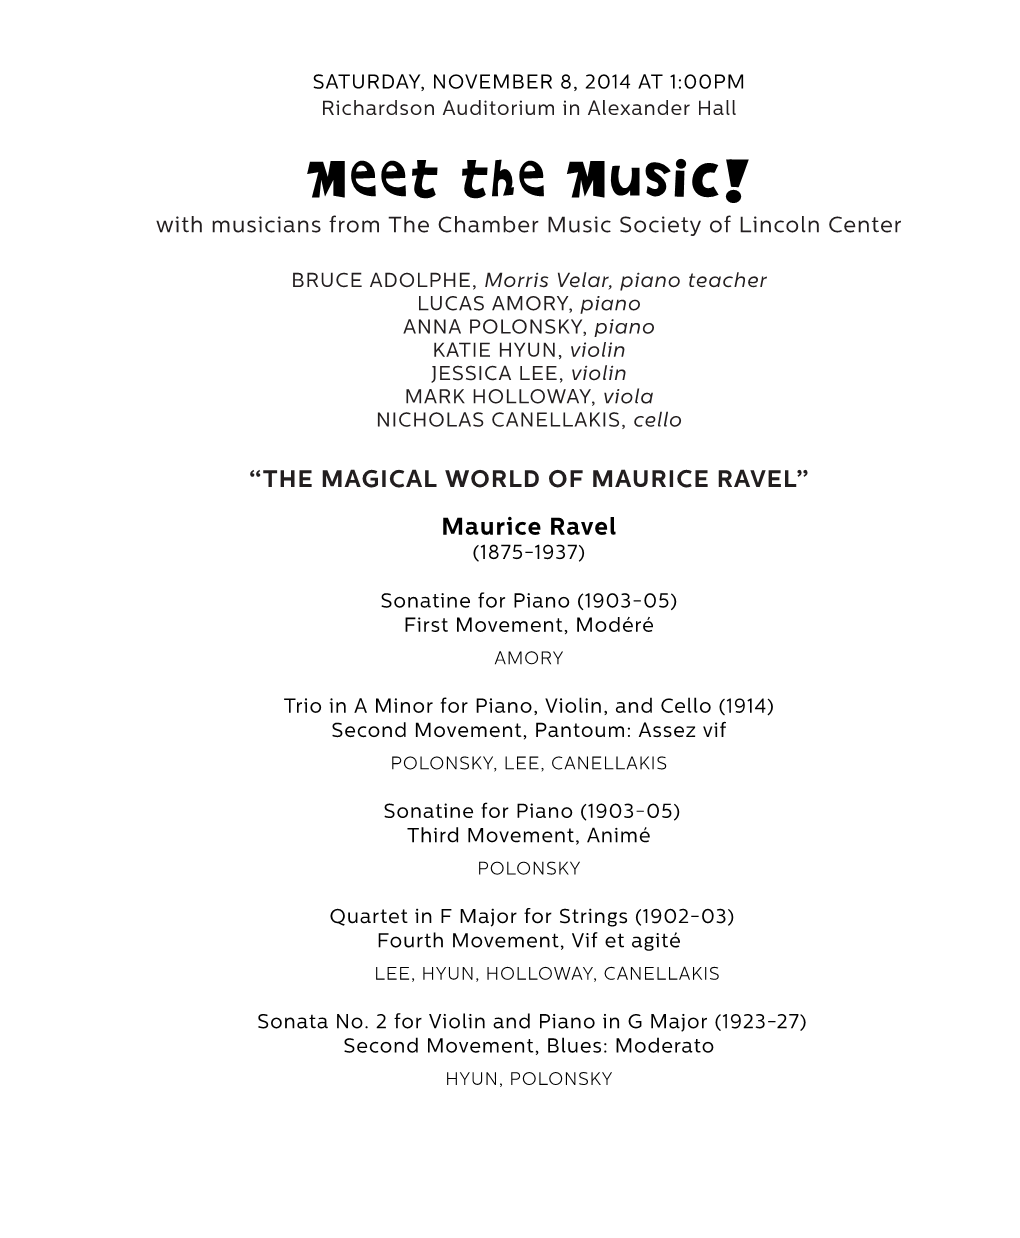 Meet the Music! with Musicians from the Chamber Music Society of Lincoln Center